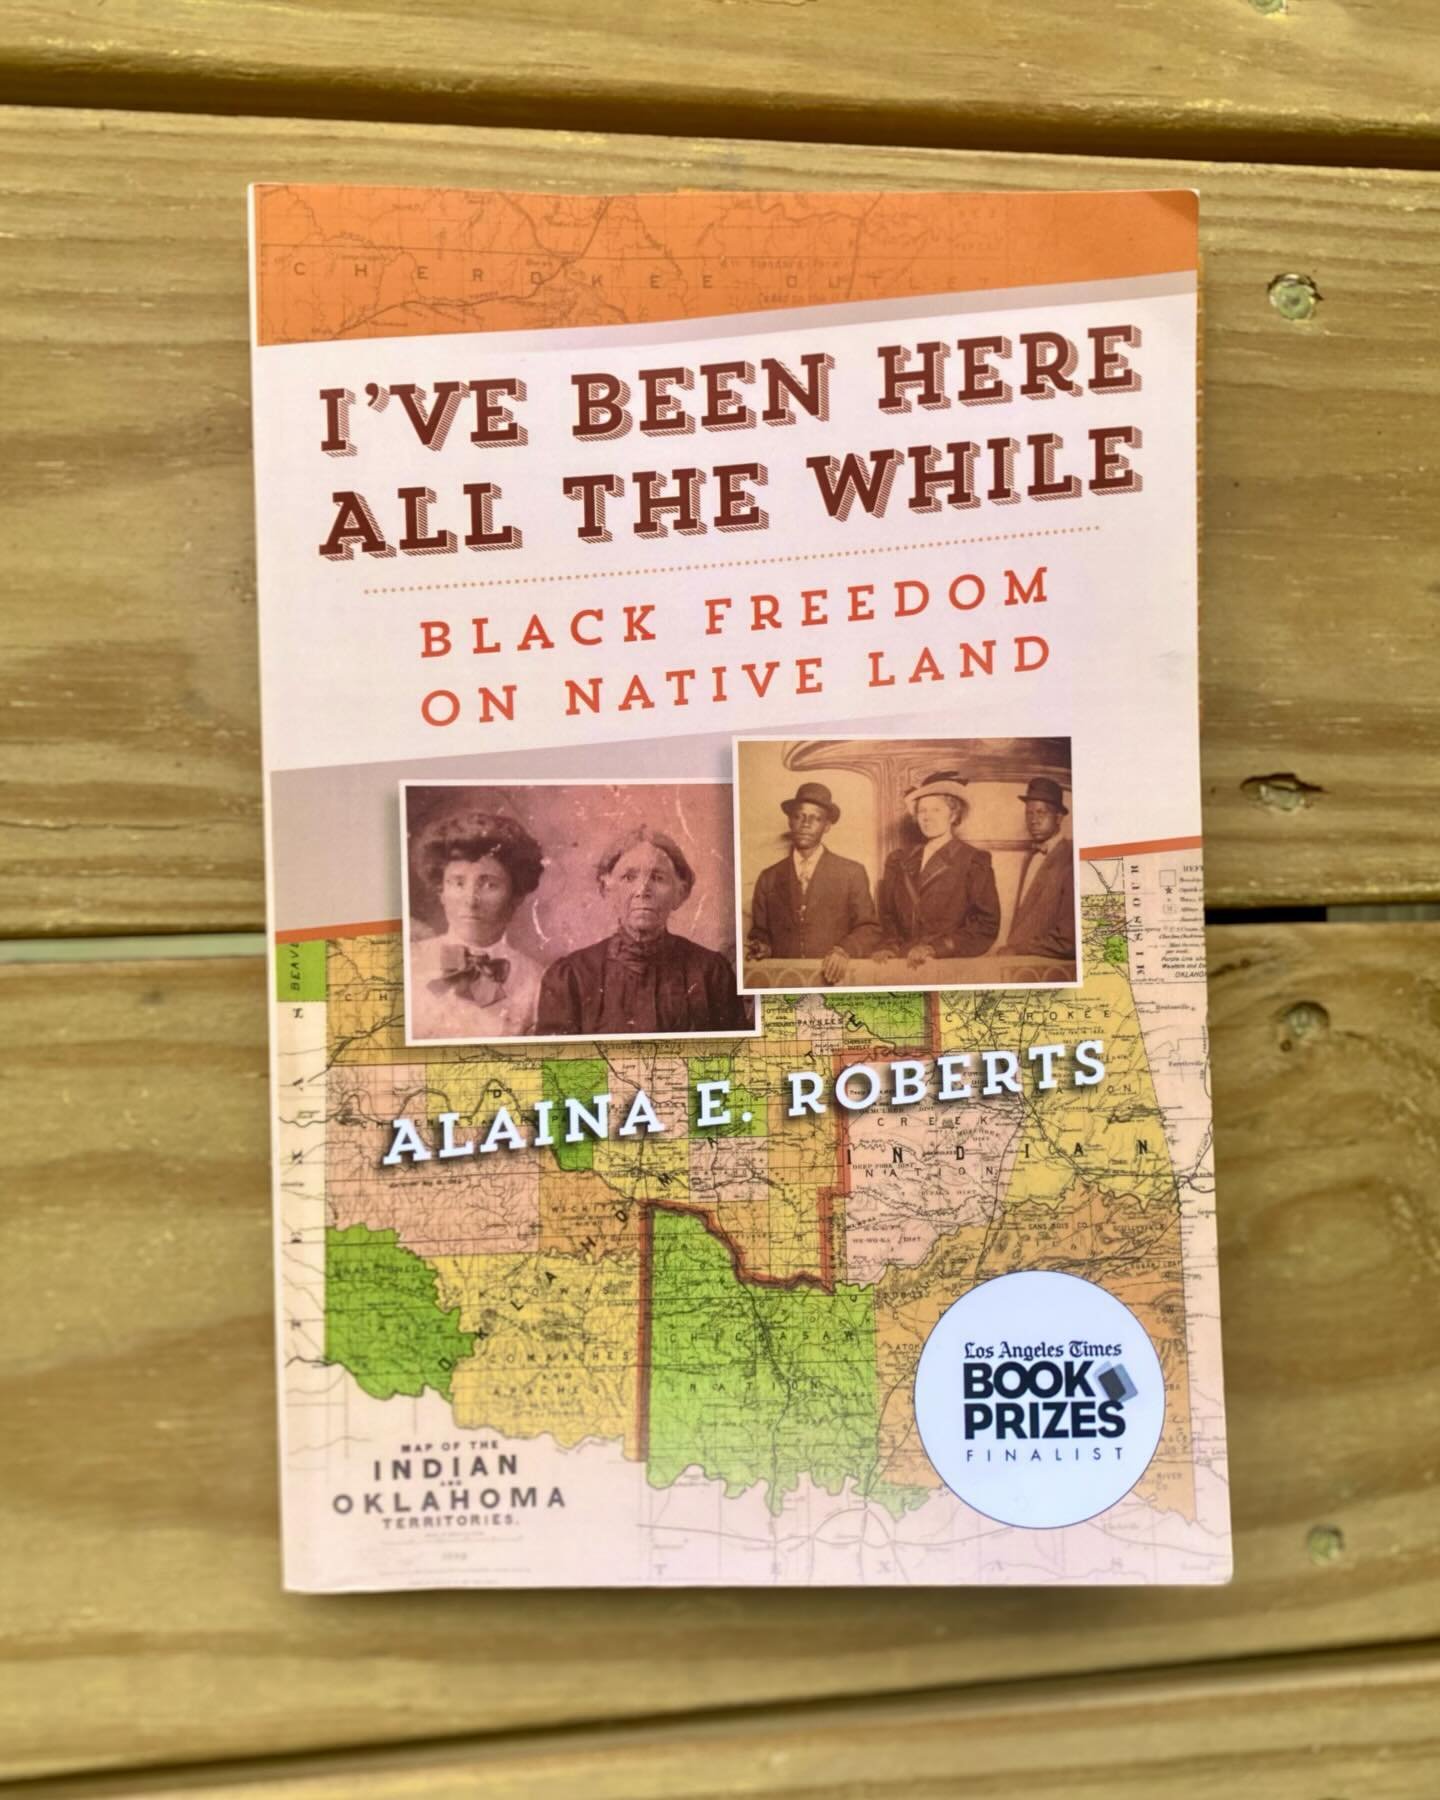 📖 I finished this amazing book last week and - whew - it&rsquo;s a must read.

📖 In &ldquo;I&rsquo;ve Been Here All the While,&rdquo; author Alaina E. Roberts, PhD discusses the complex colonial, social, and political history of her own family (Chi